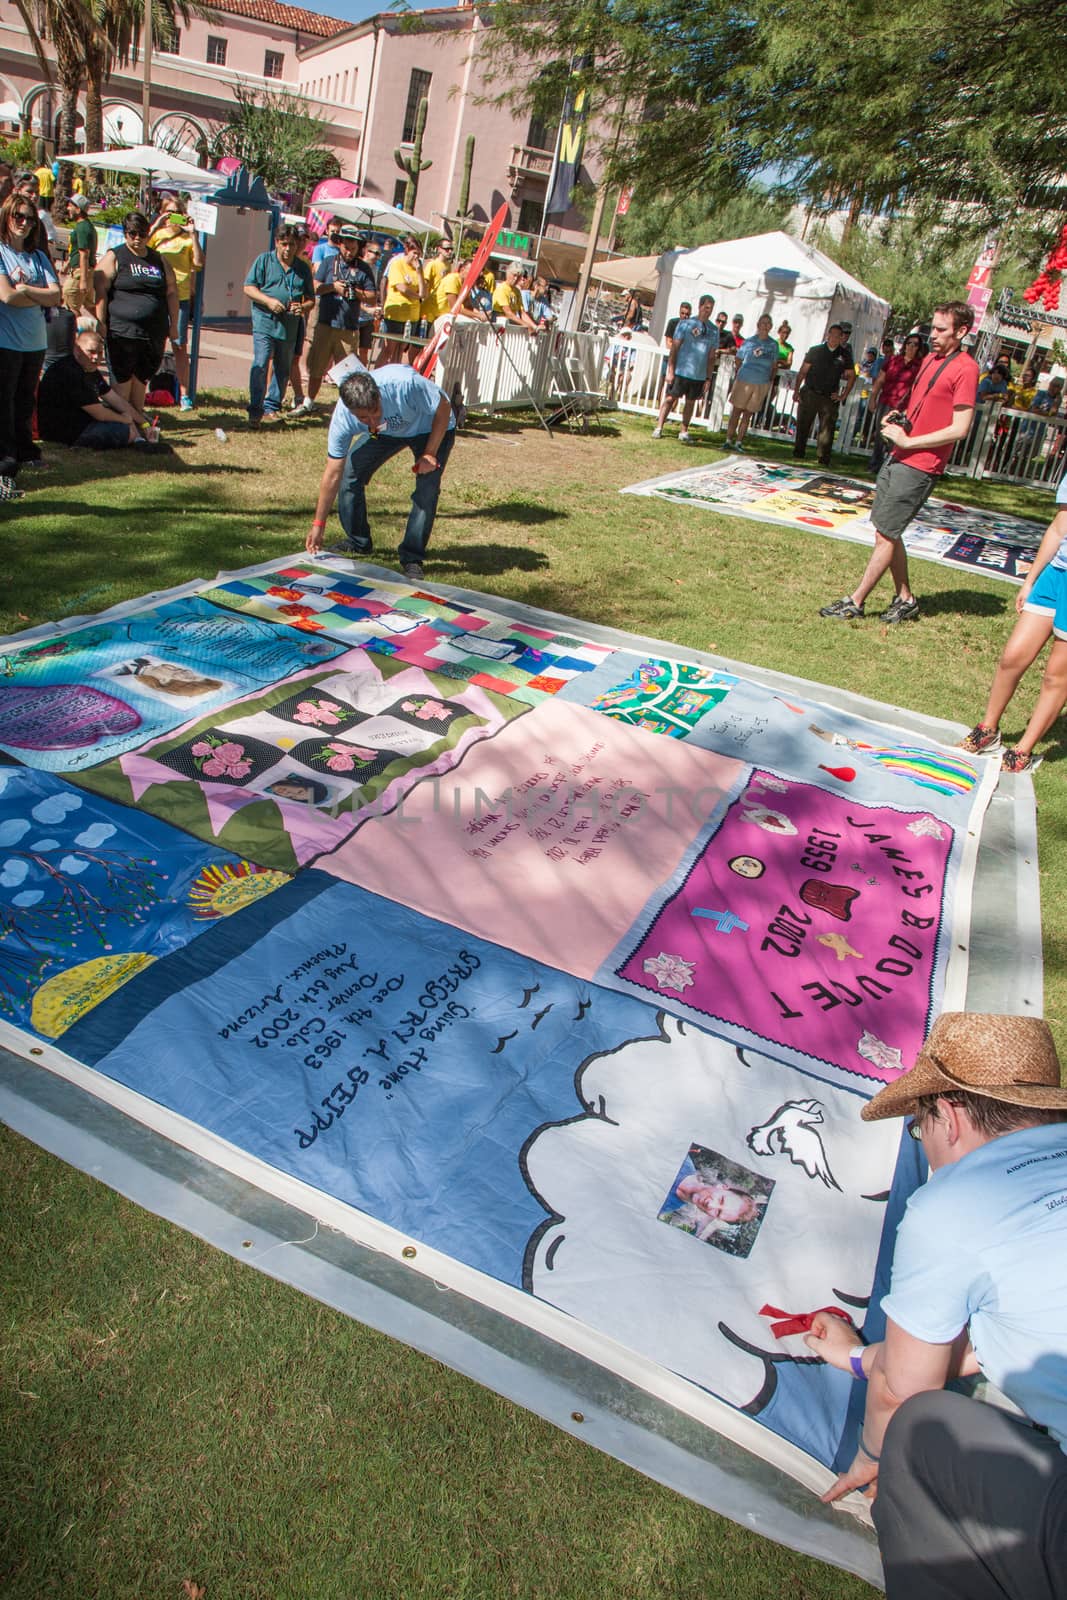 Revealing Section of AIDS Quilt at ceremony by Creatista